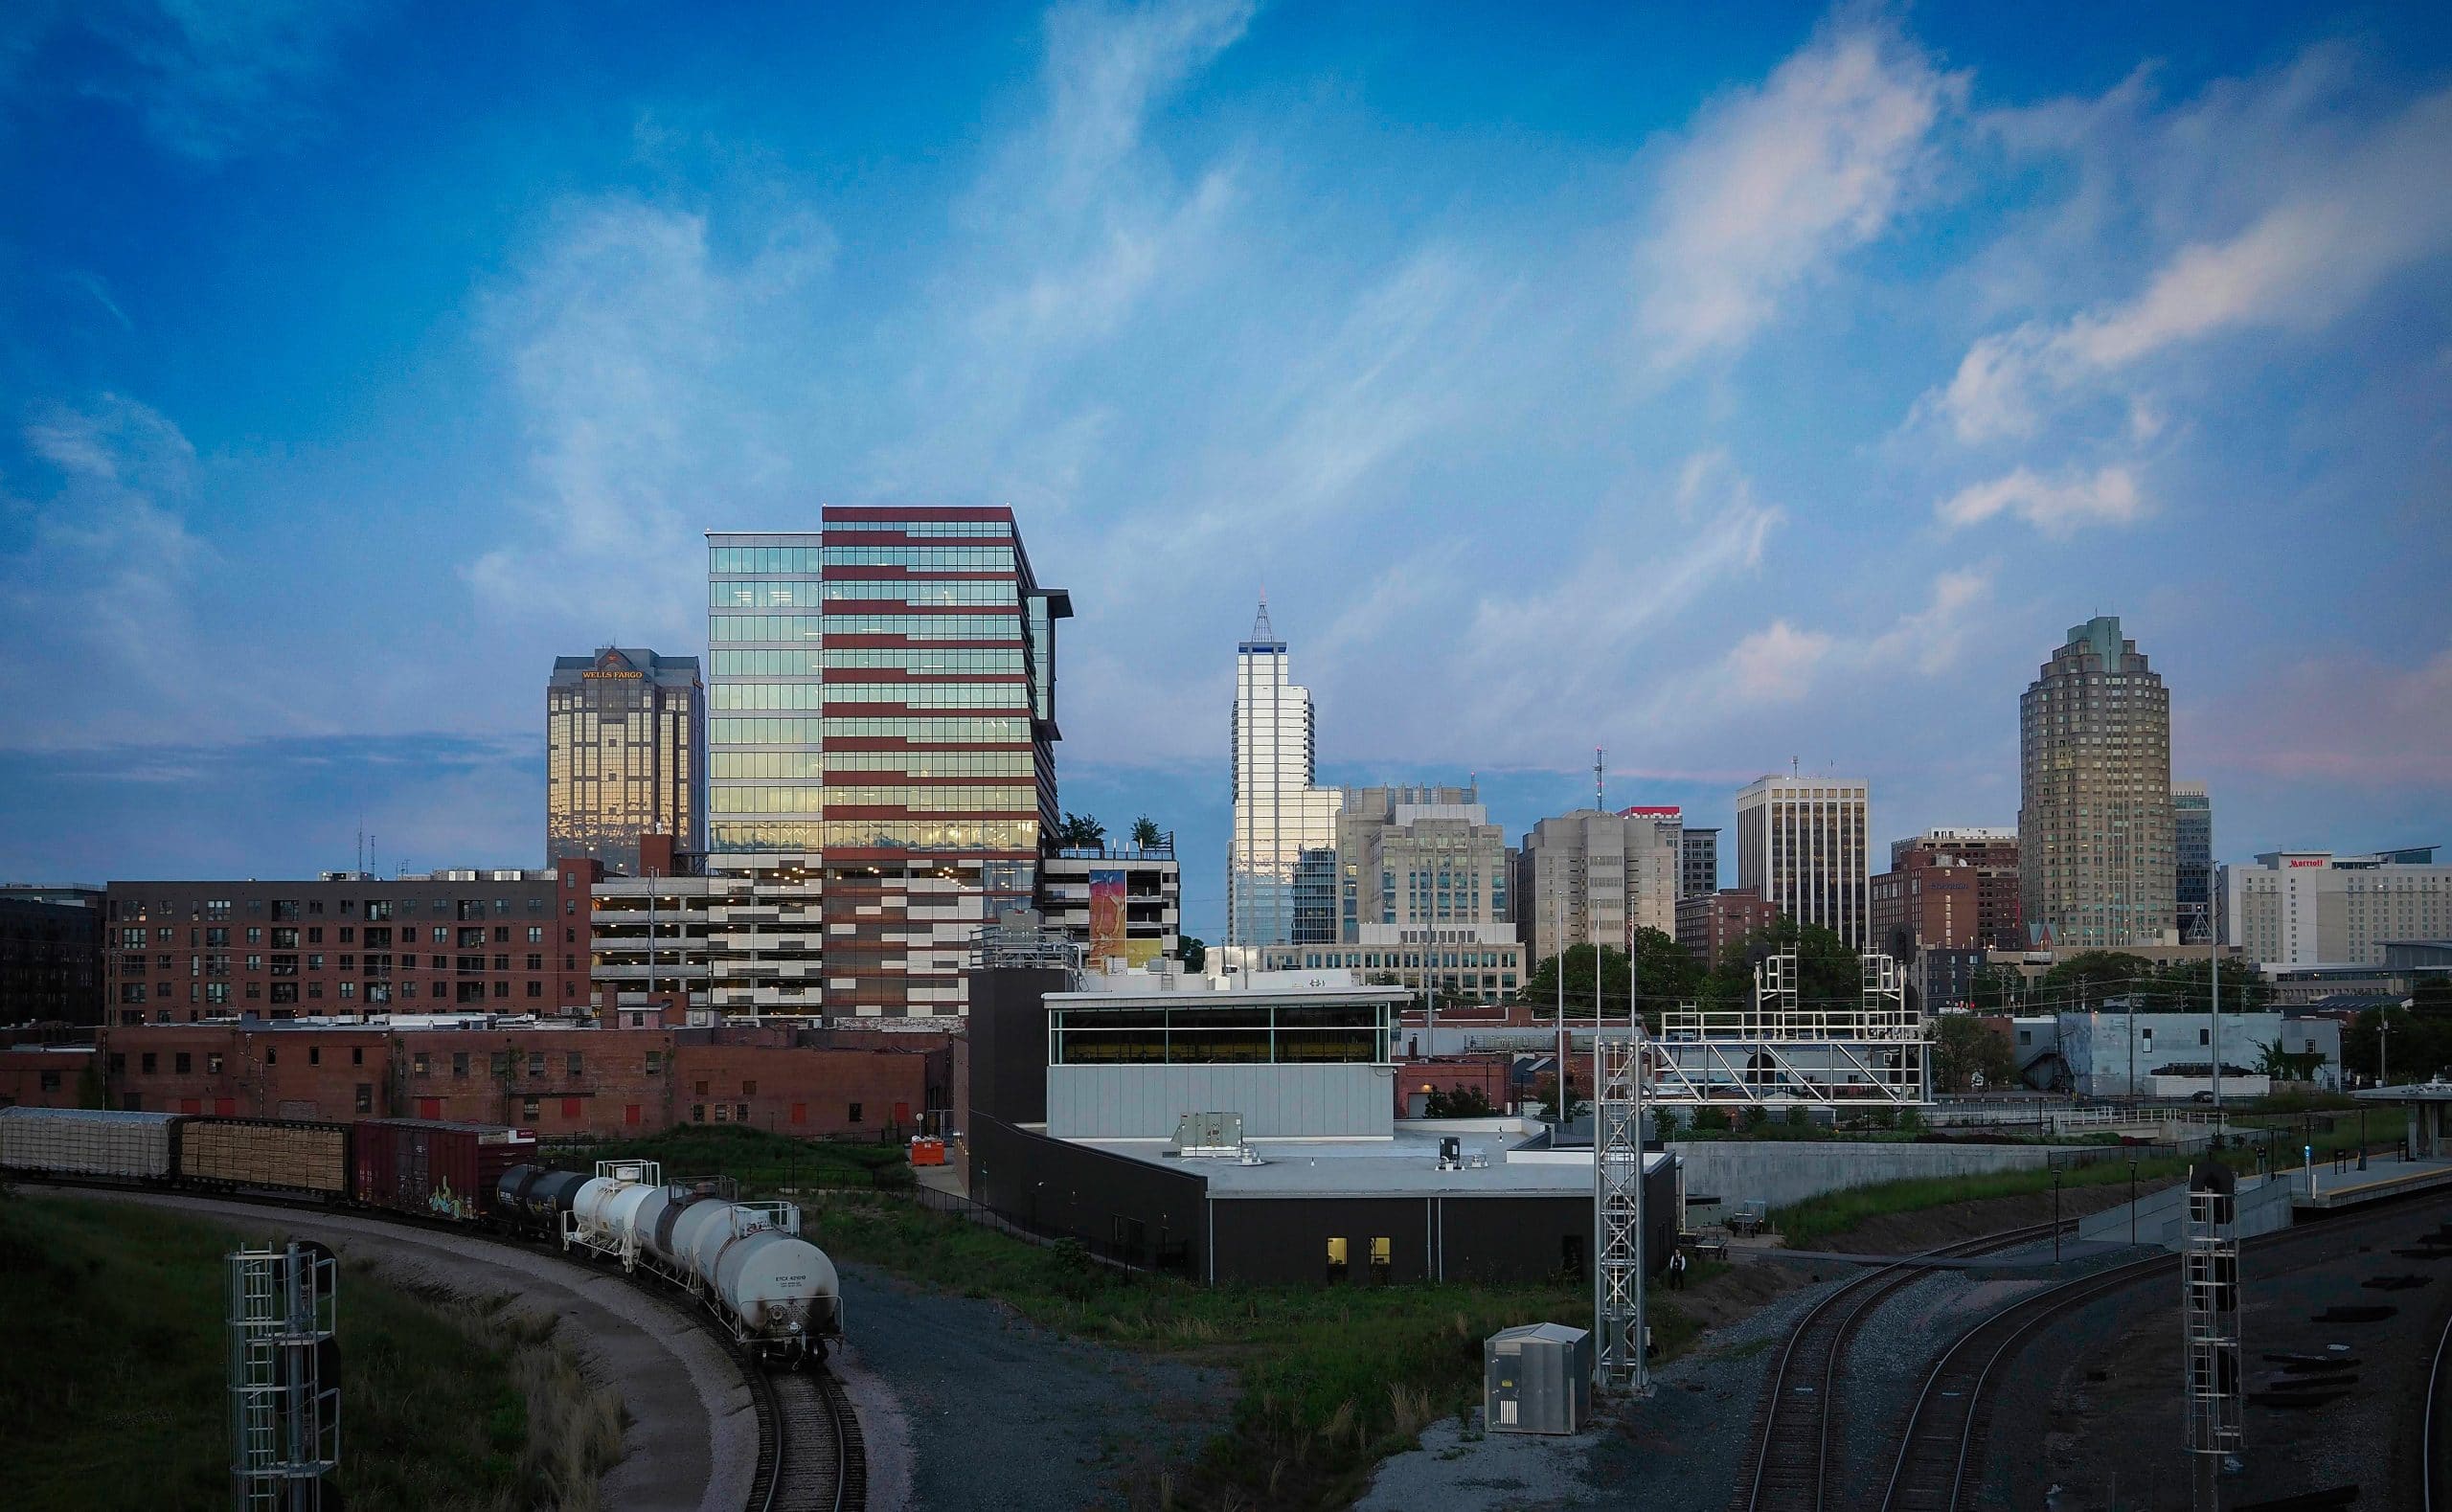 The downtown Raleigh skyline at dusk, as seen from the Boylan street bridge.